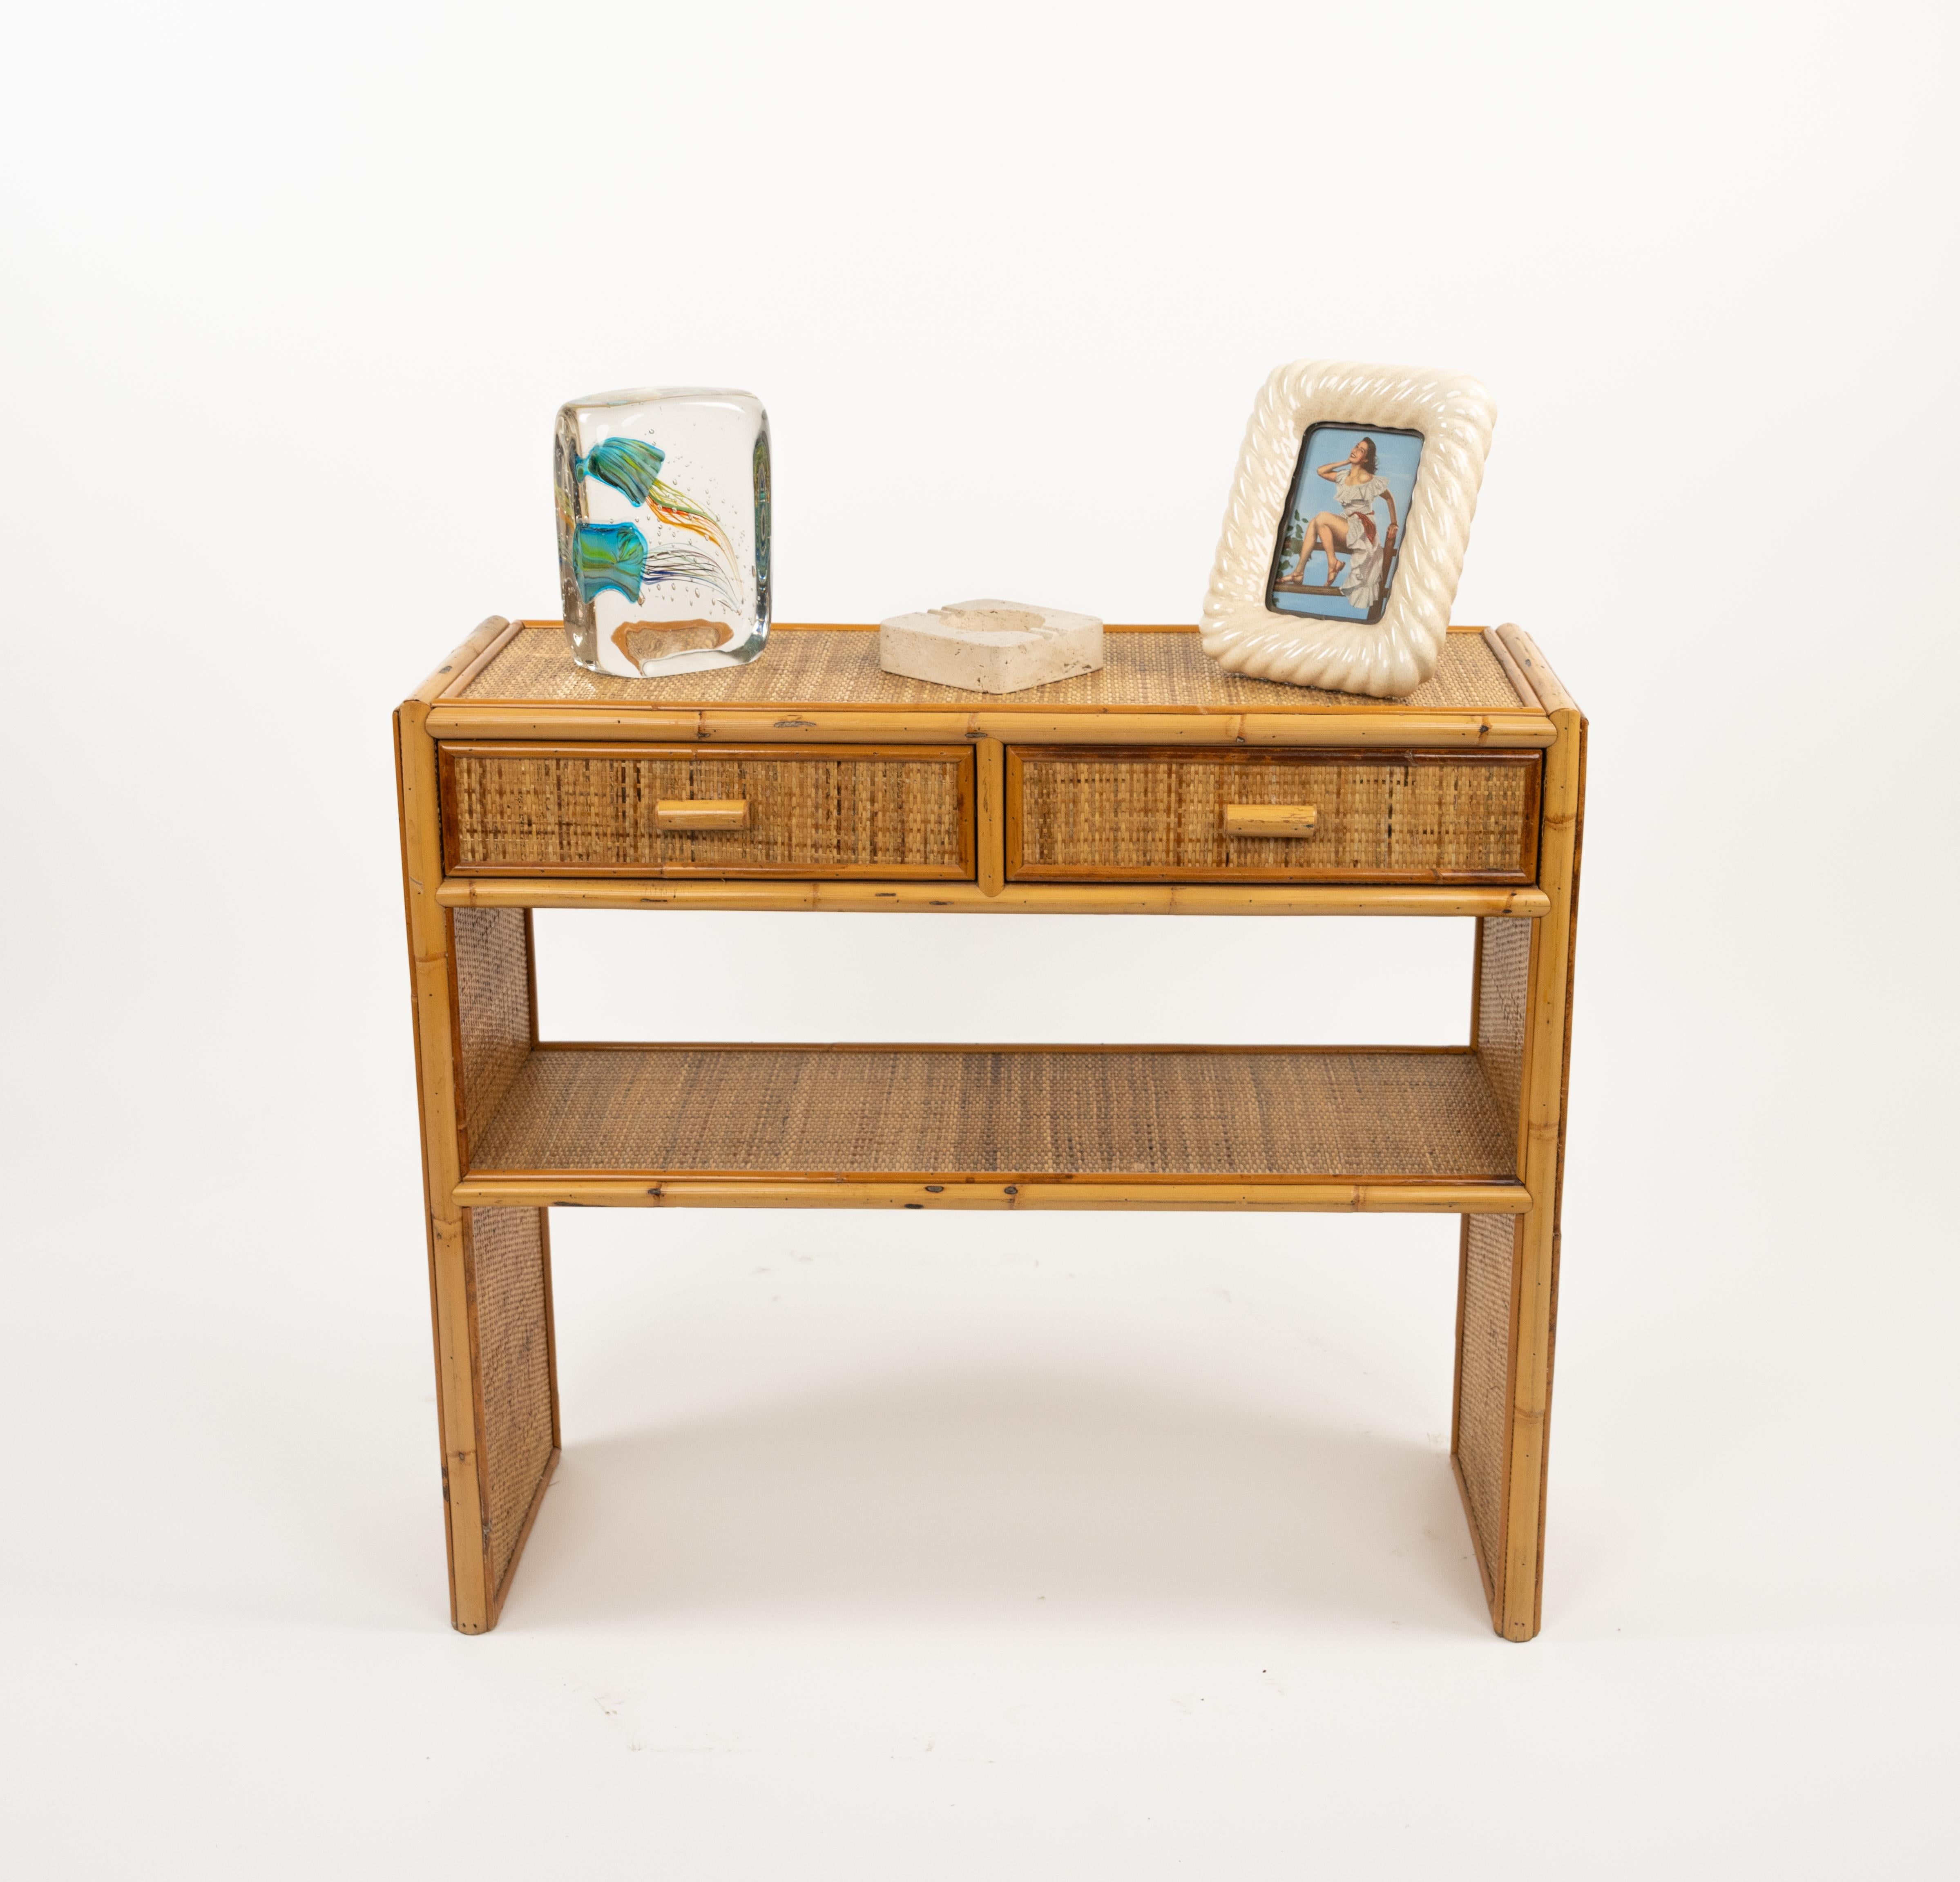 Midcentury Bamboo and Rattan Console Table with Drawers, Italy 1970s For Sale 6